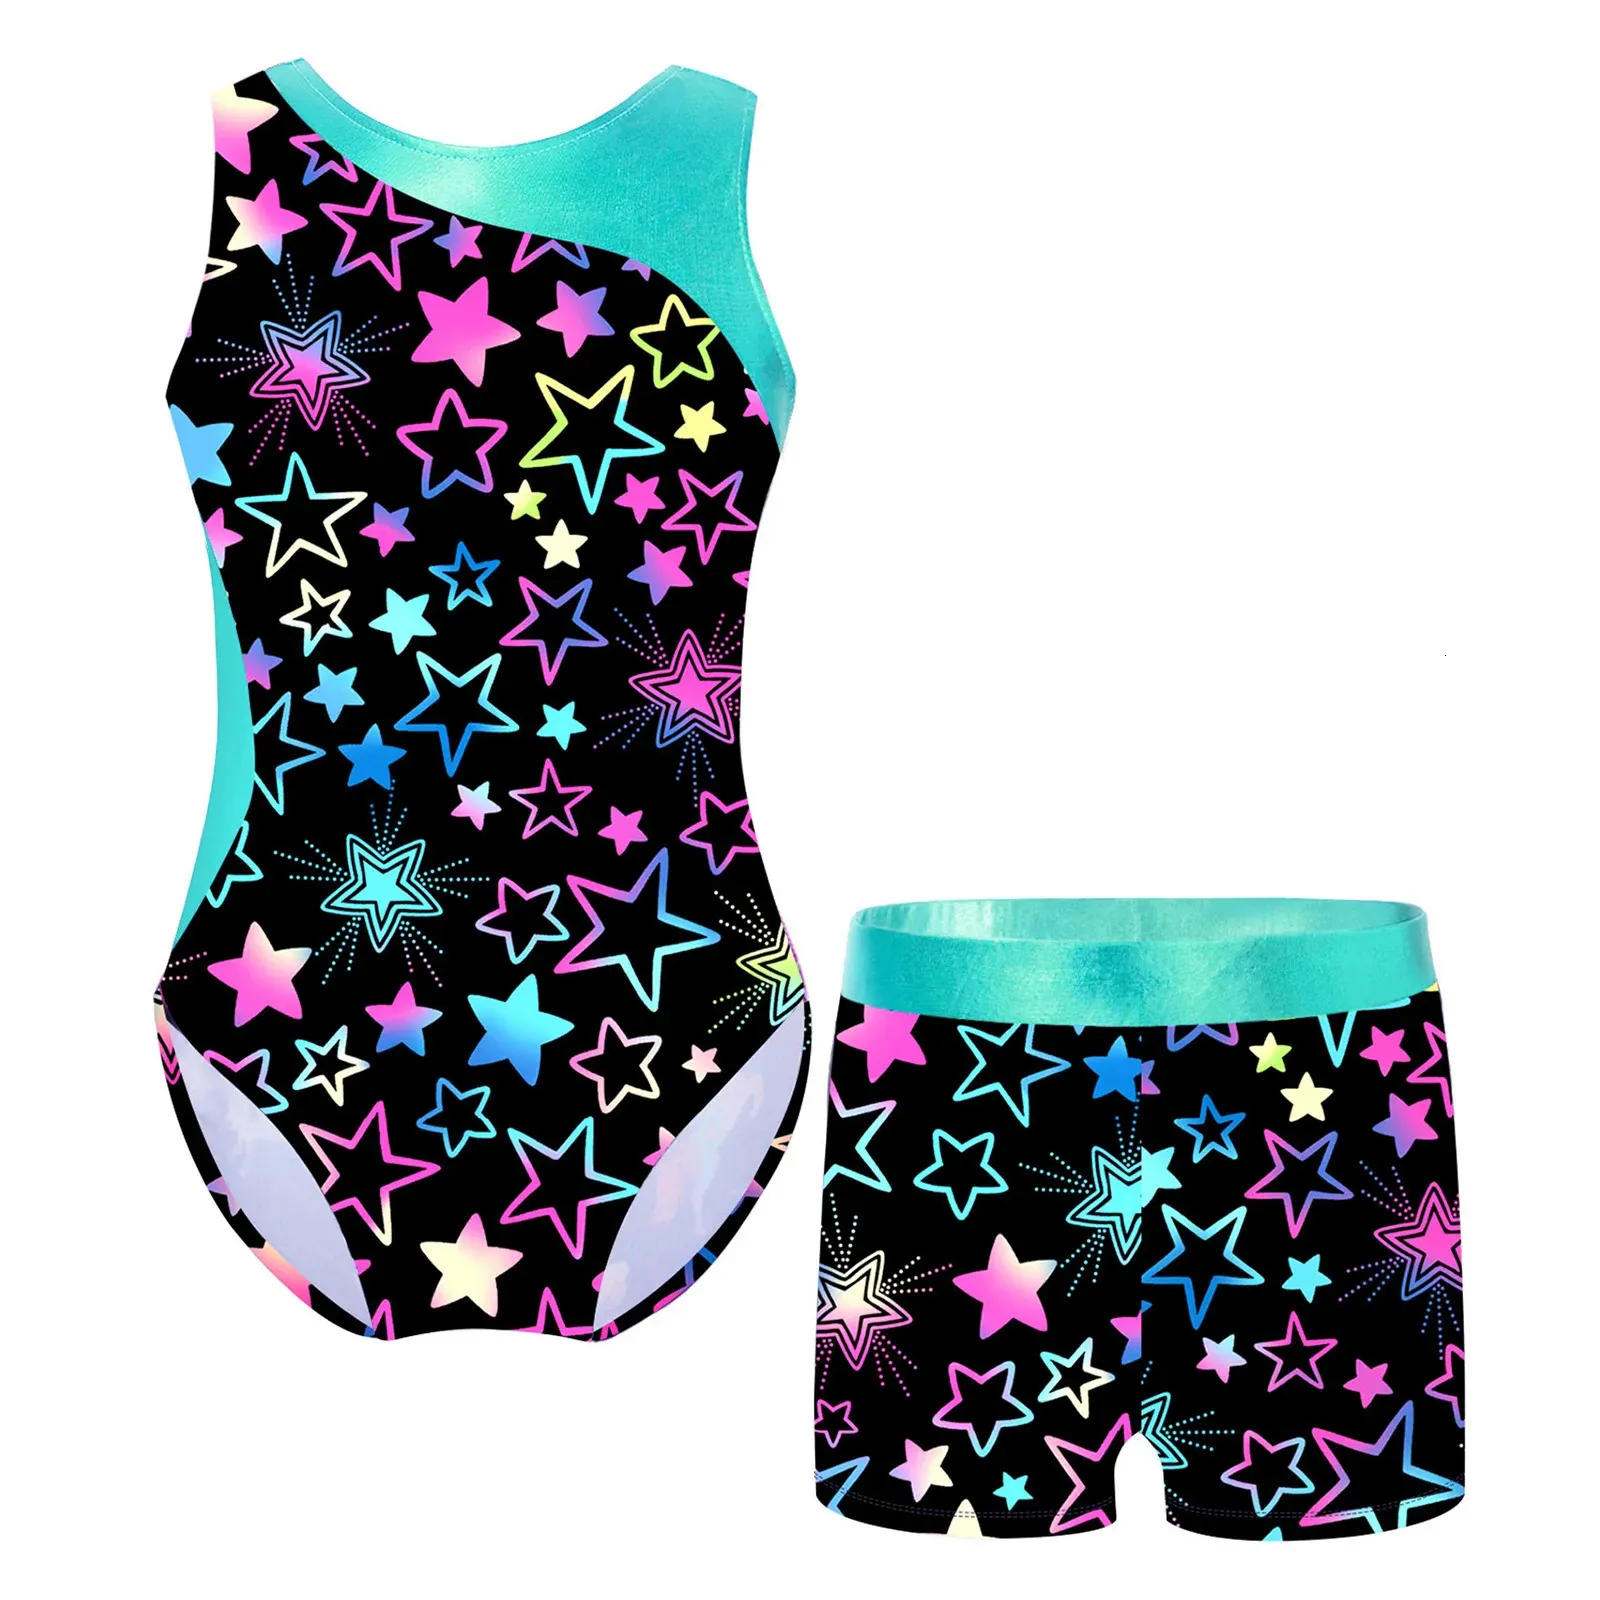 Gymnastic Rings Children Girls Printed Gymnastics Leotard Ballet Dance Outfit 2 Pieces Swimwear Swimsuit Jumpsuit with Shorts Skating Bodysuit 231027